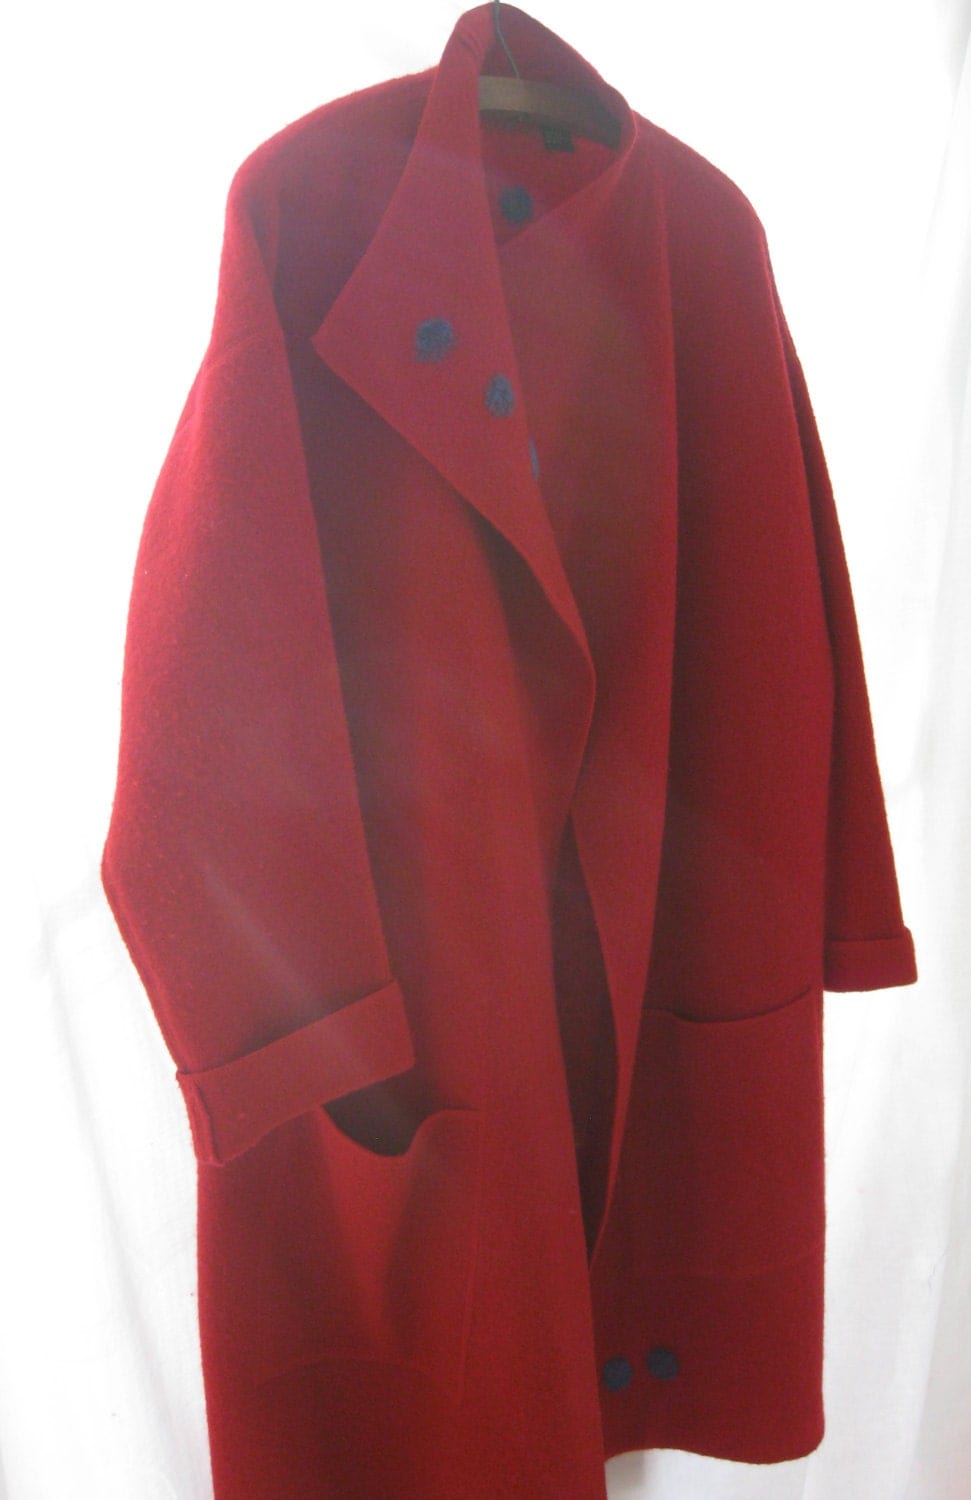 SALE Red up cycled boiled wool coat plus size unlined wool